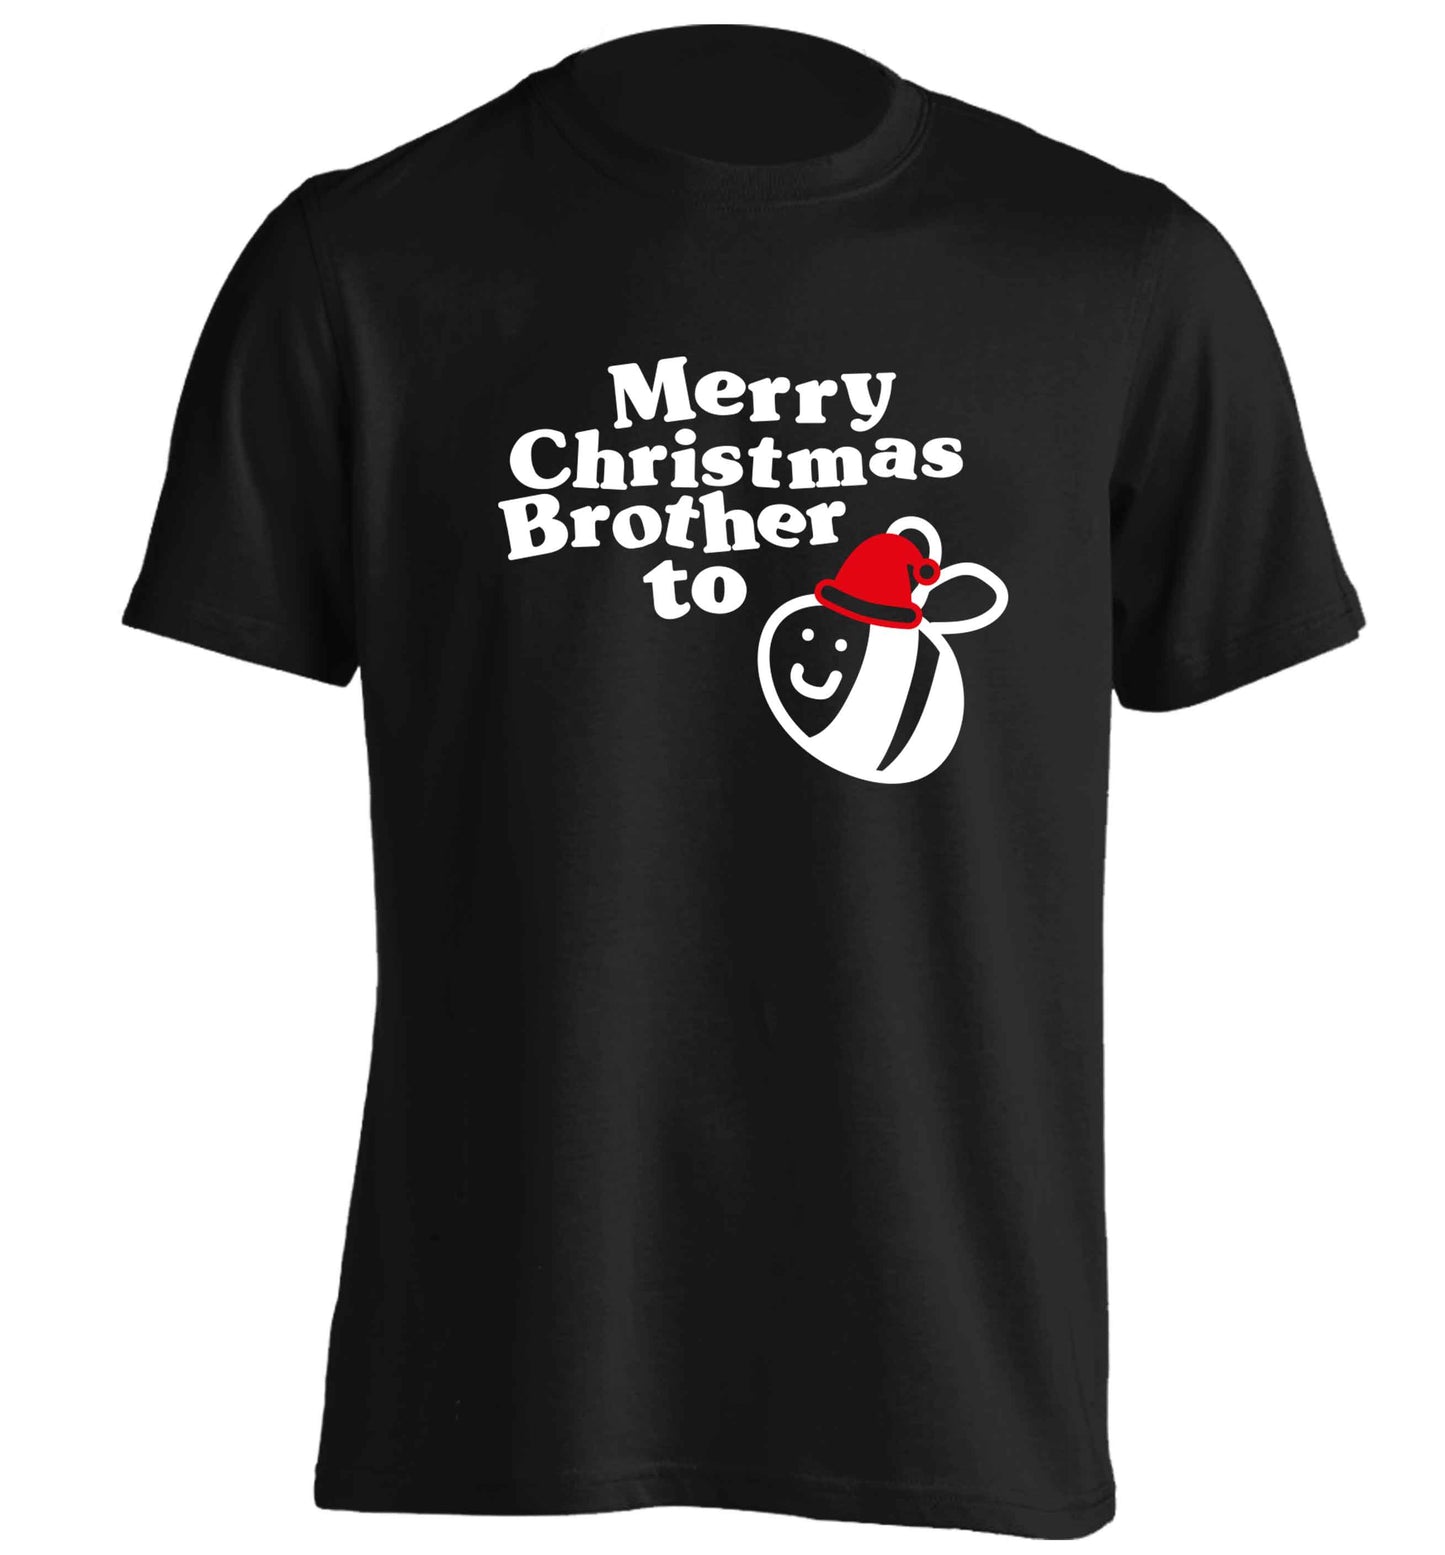 Merry Christmas brother to be adults unisex black Tshirt 2XL